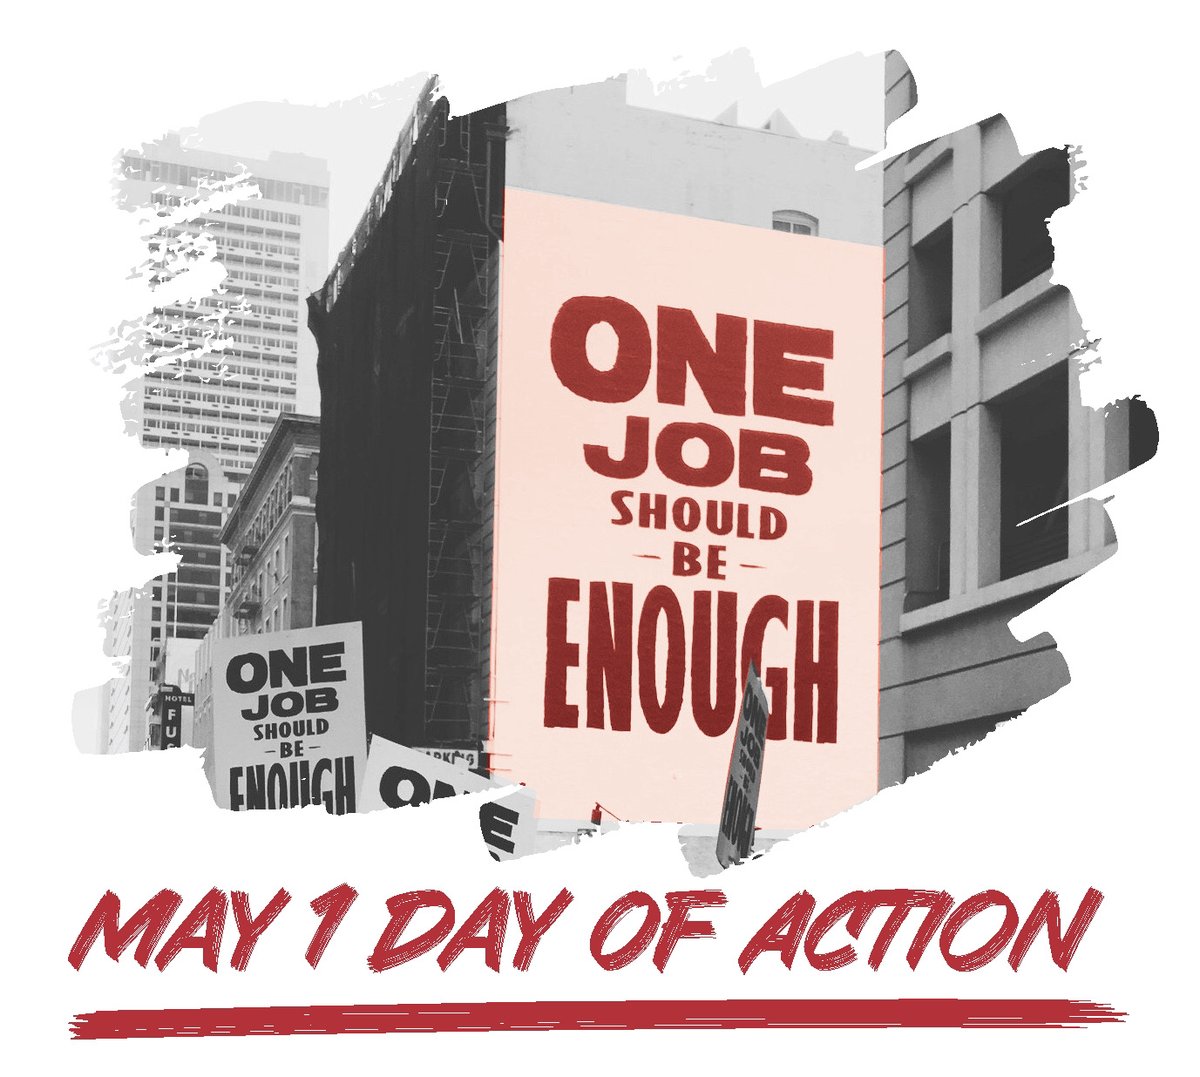 Union hotel workers say: Respect our Work, Respect our Guests, Respect our Union! 📢📢 BOSTON MAY DAY RALLY Wednesday, May 1 at 5pm Sam Adams Park at Faneuil Hall (corner of Congress Street & North Street)